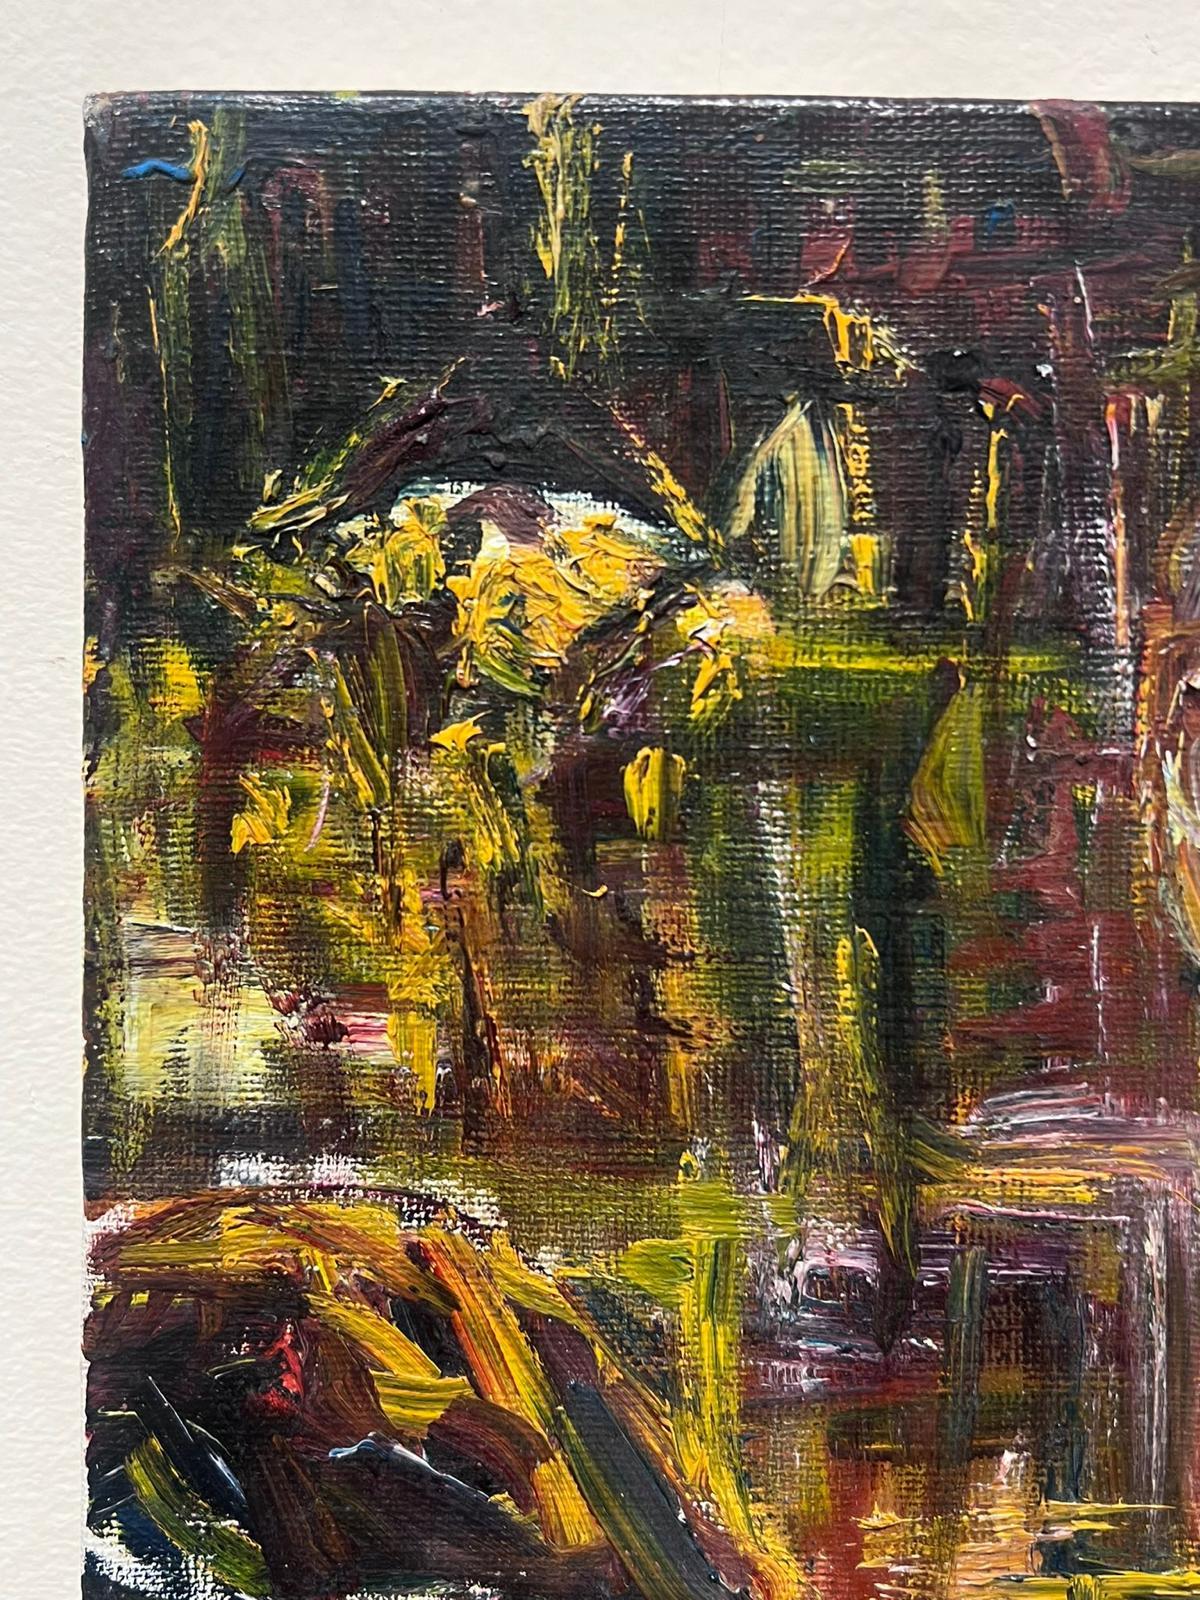 Abstract Expressionist Composition
by Jacques COULAIS (1955-2011)
signed oil painting on canvas
unframed: 9.5 x 7.5 inches
condition: excellent
provenance: all the paintings we have for sale by this artist have come from the artists studio and are